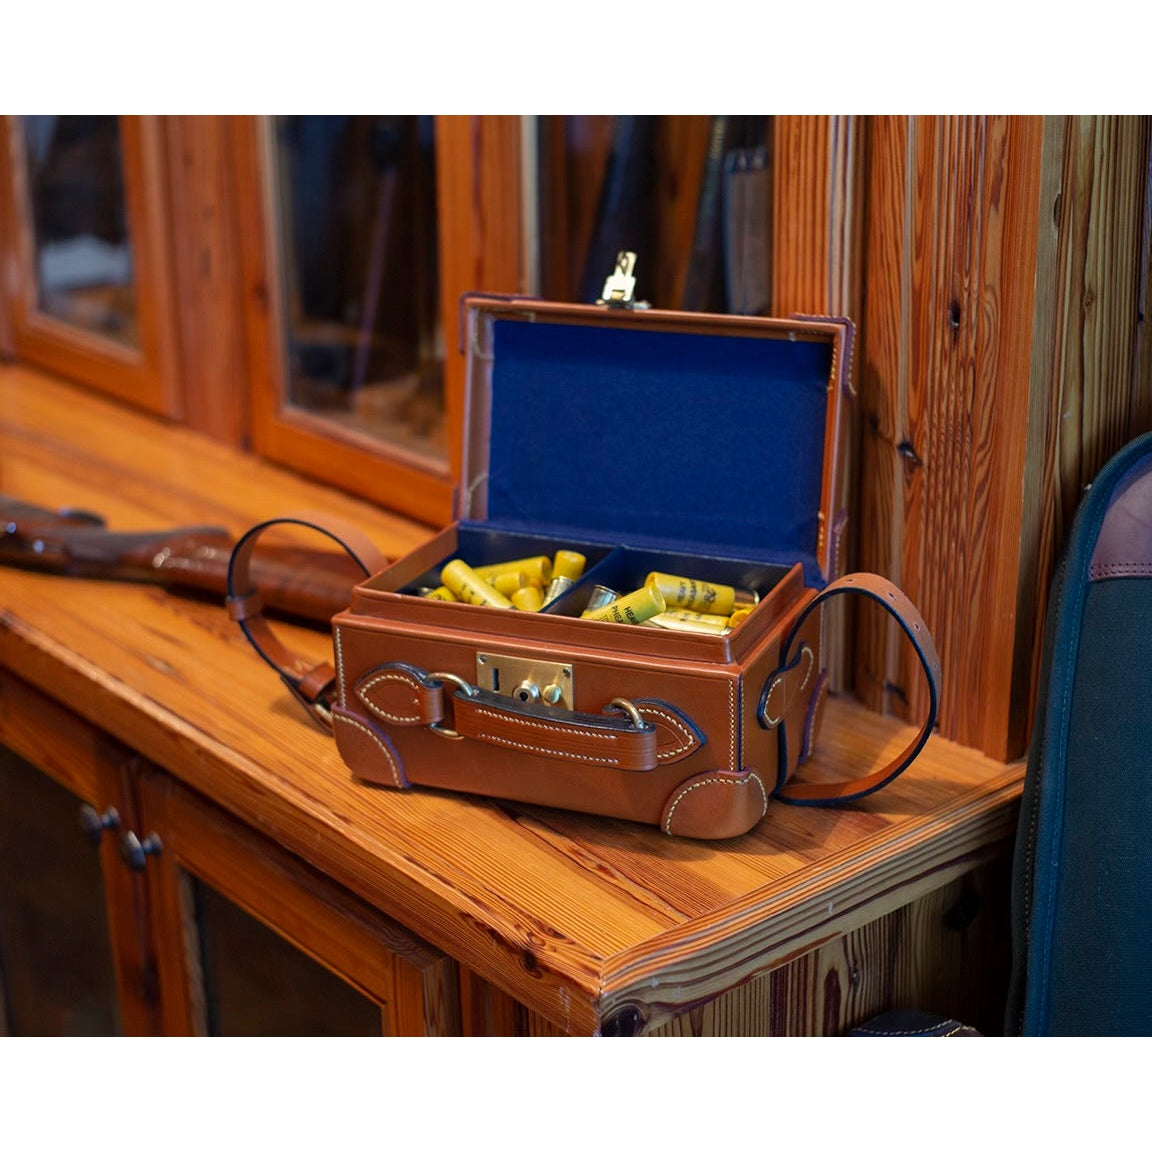 Leather Cartridge Holder-HUNTING/OUTDOORS-Kevin's Fine Outdoor Gear & Apparel